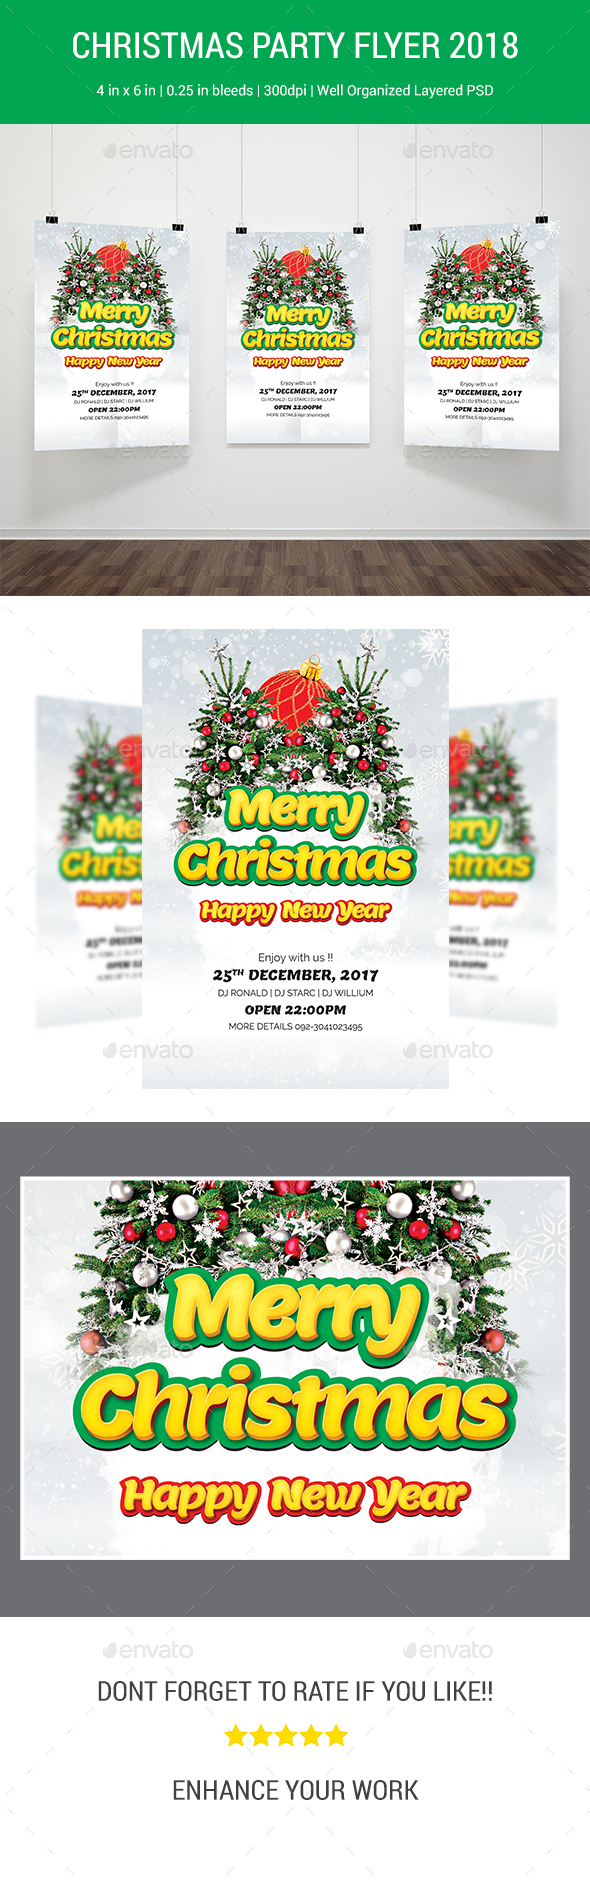 GraphicRiver Christmas Party Flyer 2018 21167691